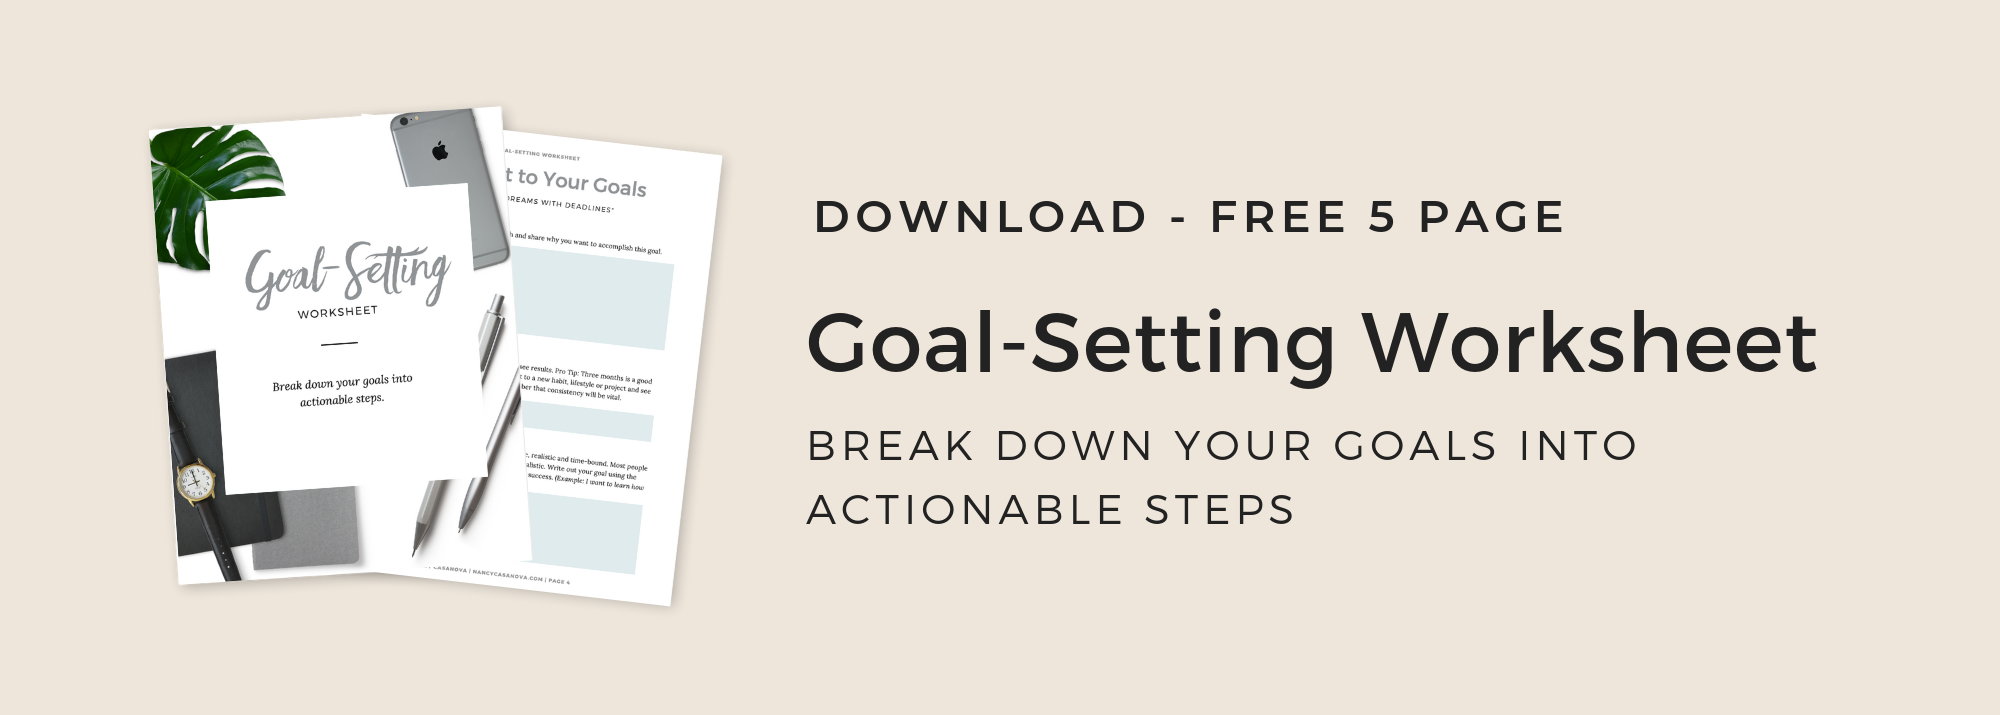 Set goals that set you up for success. Use this worksheet to help you break down your goals into actionable steps.